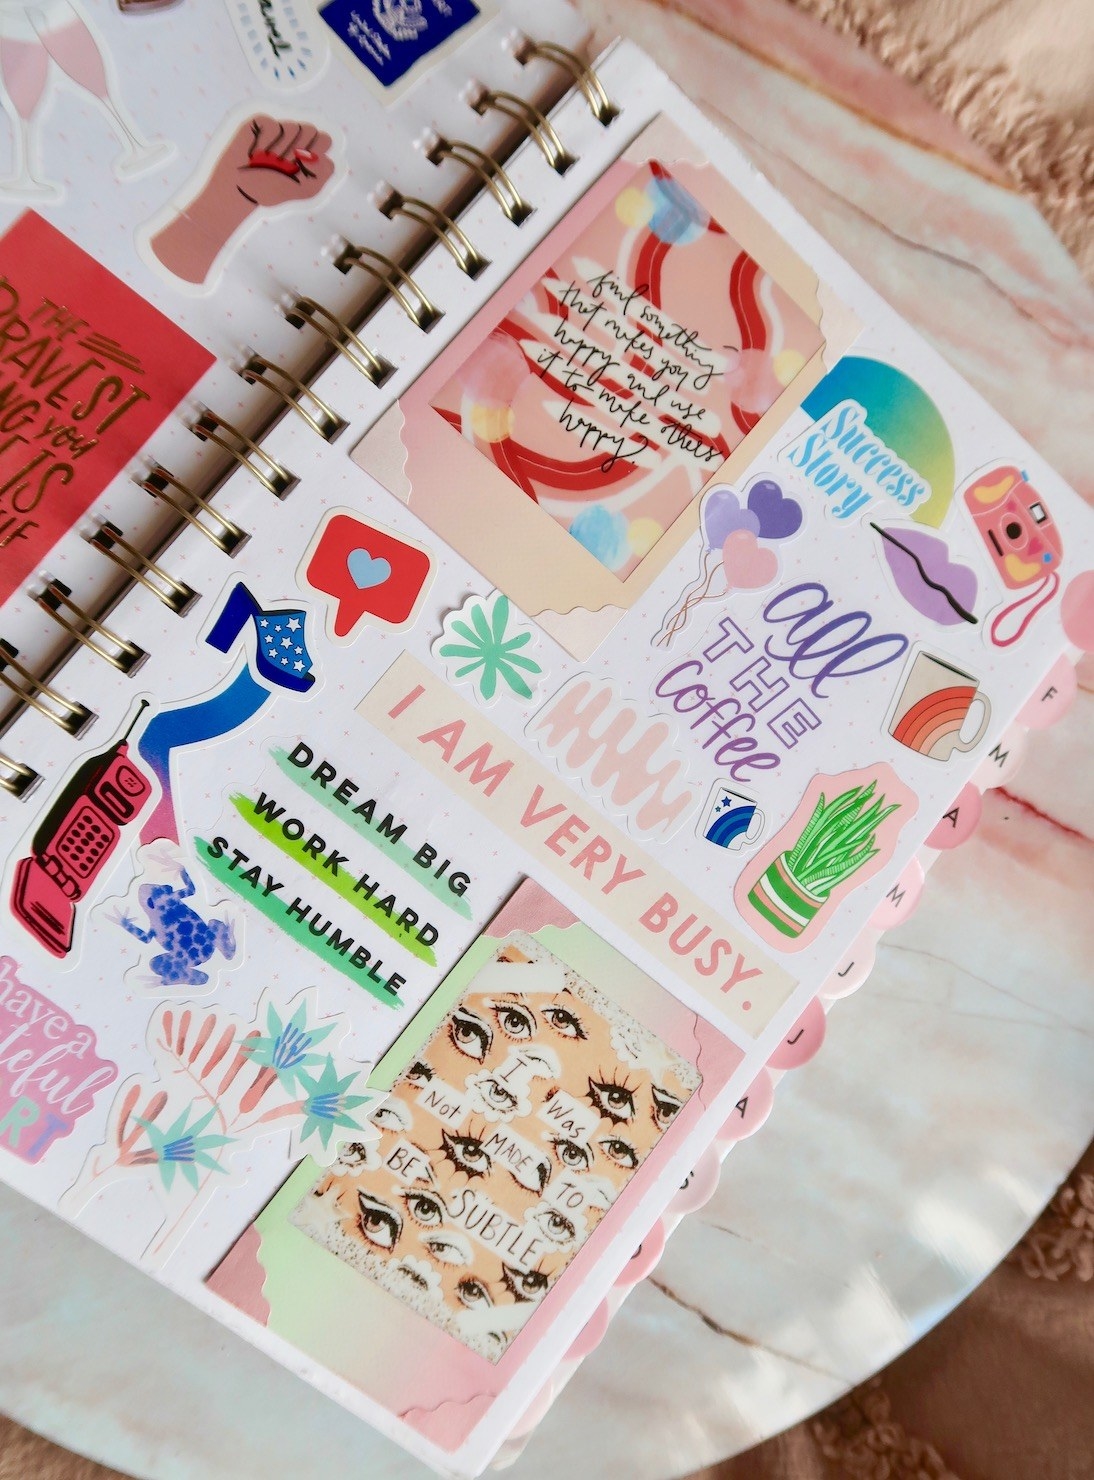 An open planner decorated with a lot of stickers and instant pictures taped inside